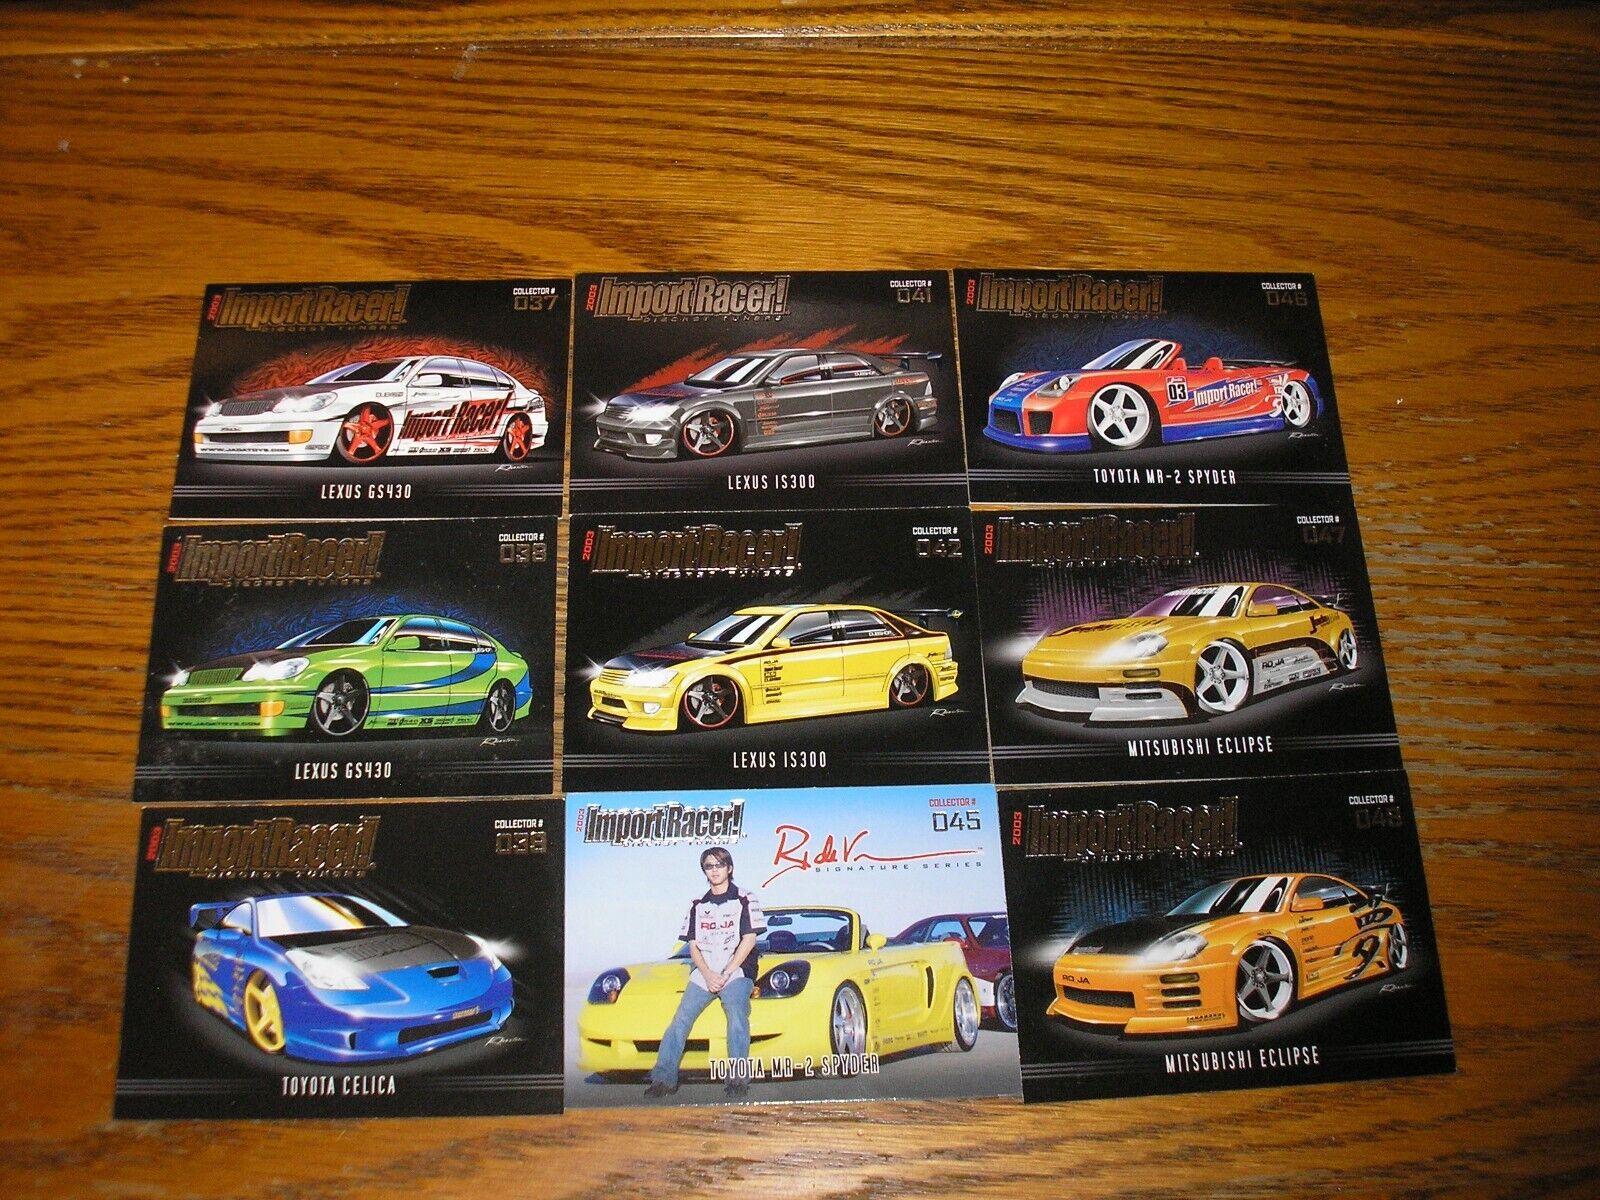 Nice Jada Toys Lot of 9 Wave 4 2003 Import Racer Collector Cards 